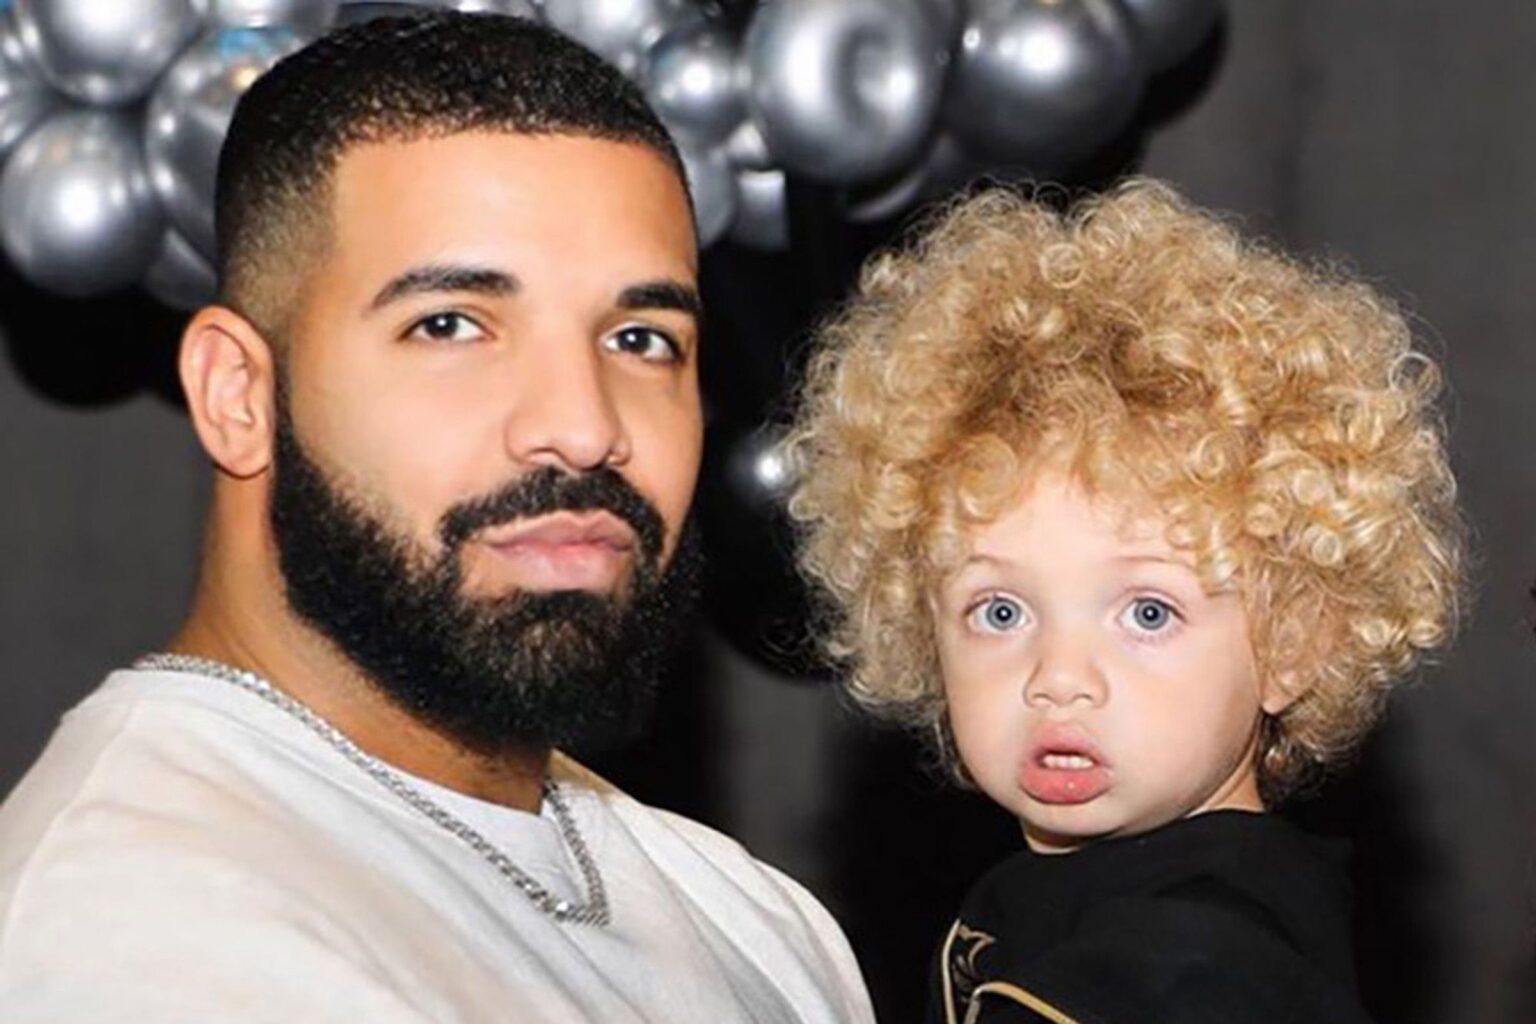 We ambled over to Drake’s Instagram account to check out the baby and dad action. Here’s all the cute moments we could find of Drake with Adonis.